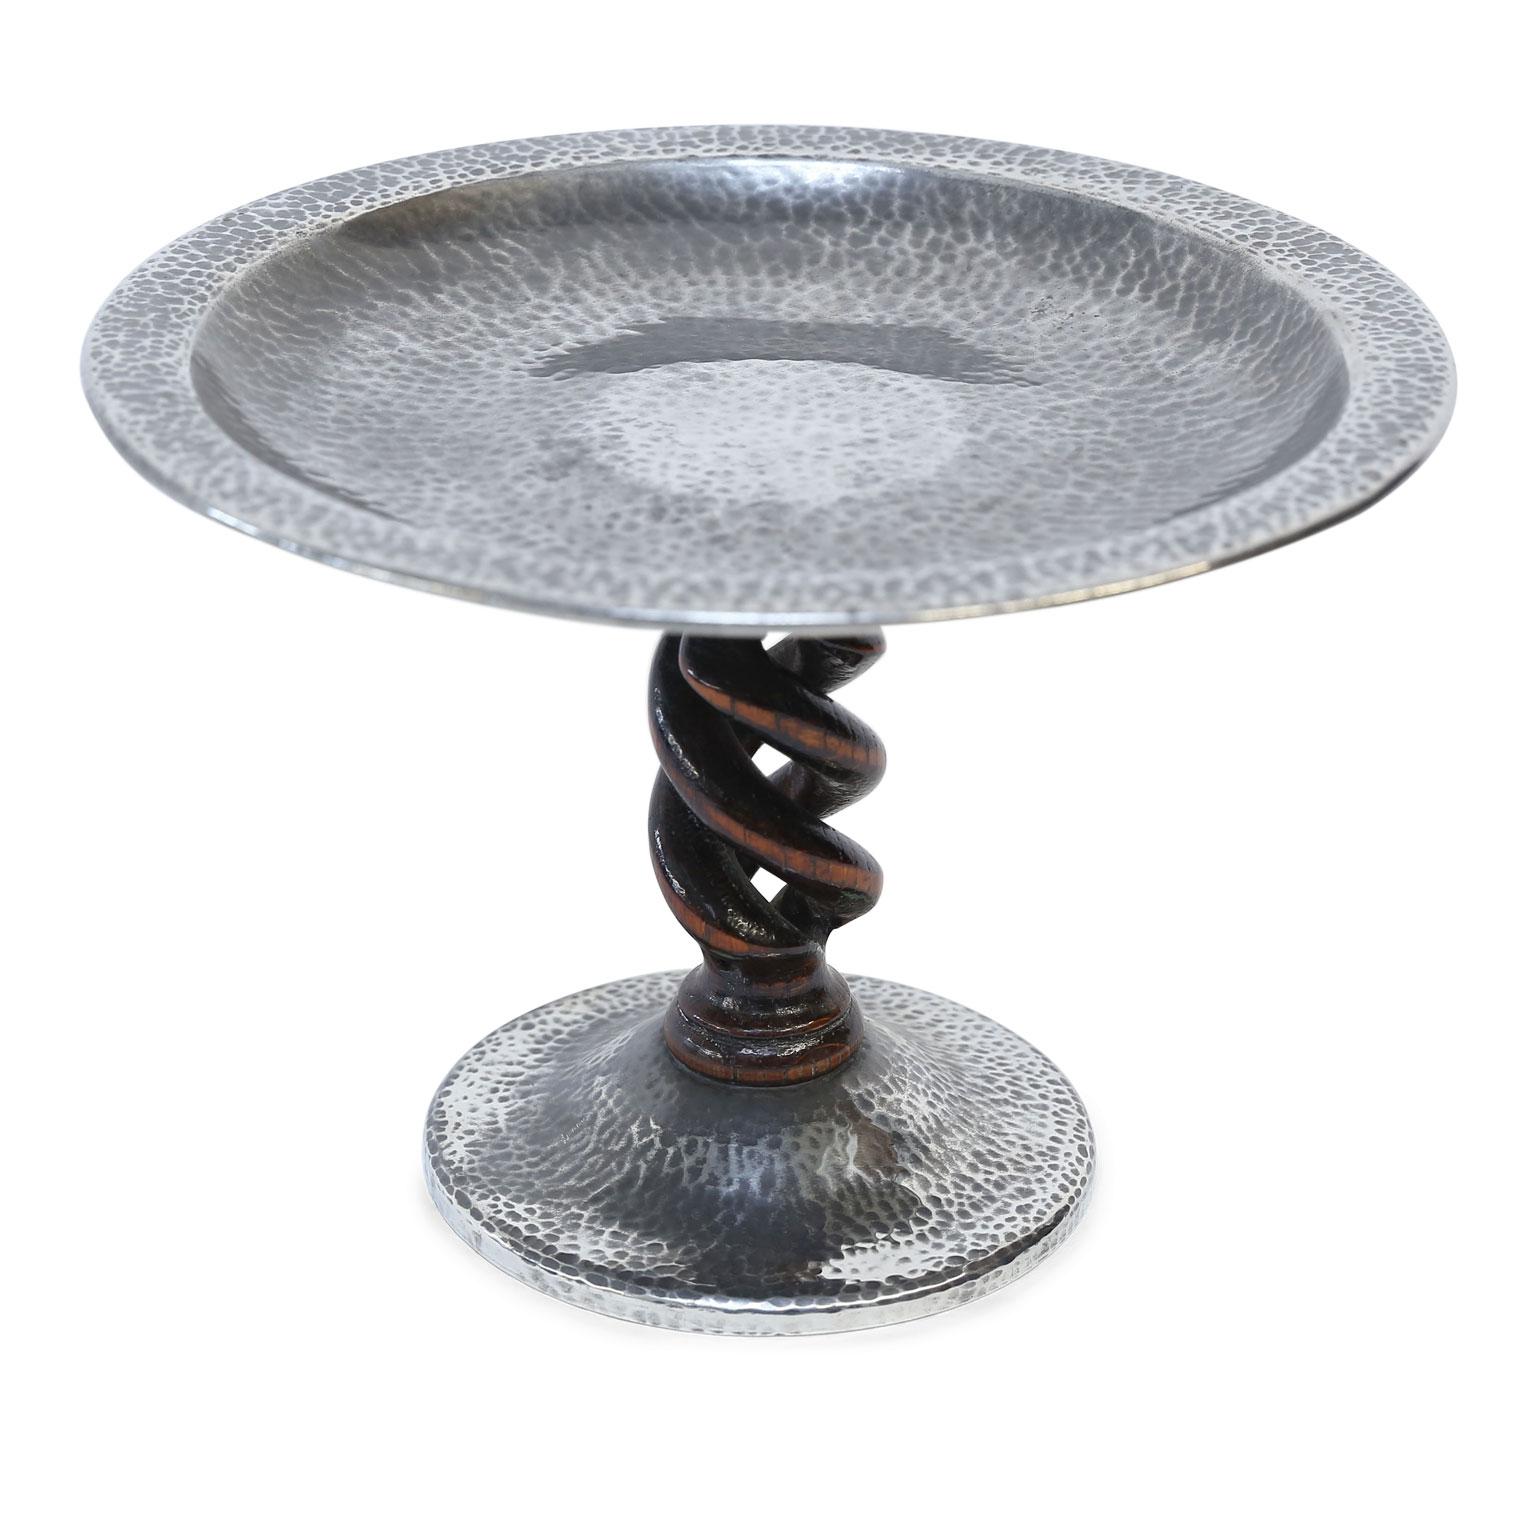 Tudric Pewter tazza, or compote, with barley-twist walnut stem. Made by W. H. Haseler's of Birmingham in a Celtic revival style for Liberty & Co of London, (circa 1900-1930). Tudric Pewter became known as 'poor man's silver' due to its shine, which